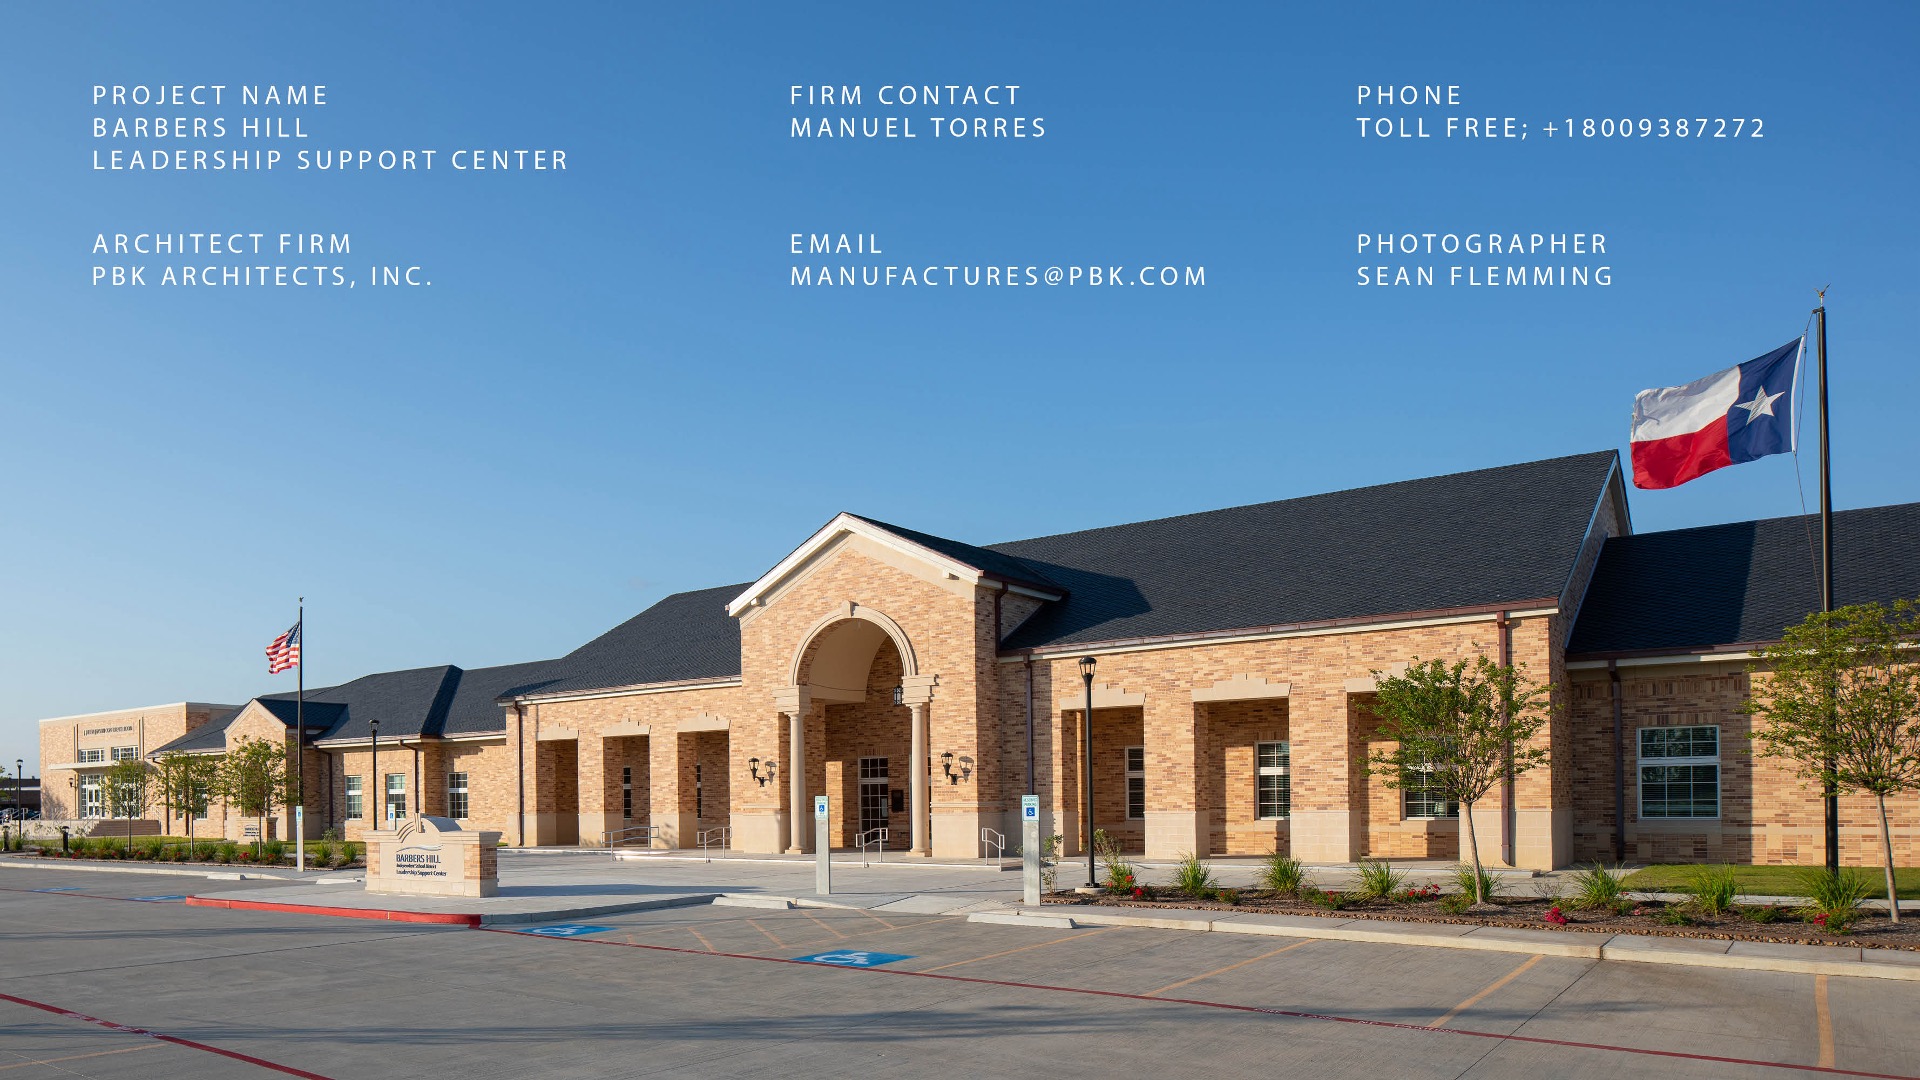 Barbers Hill ISD Barbers Hill Leadership Support Center